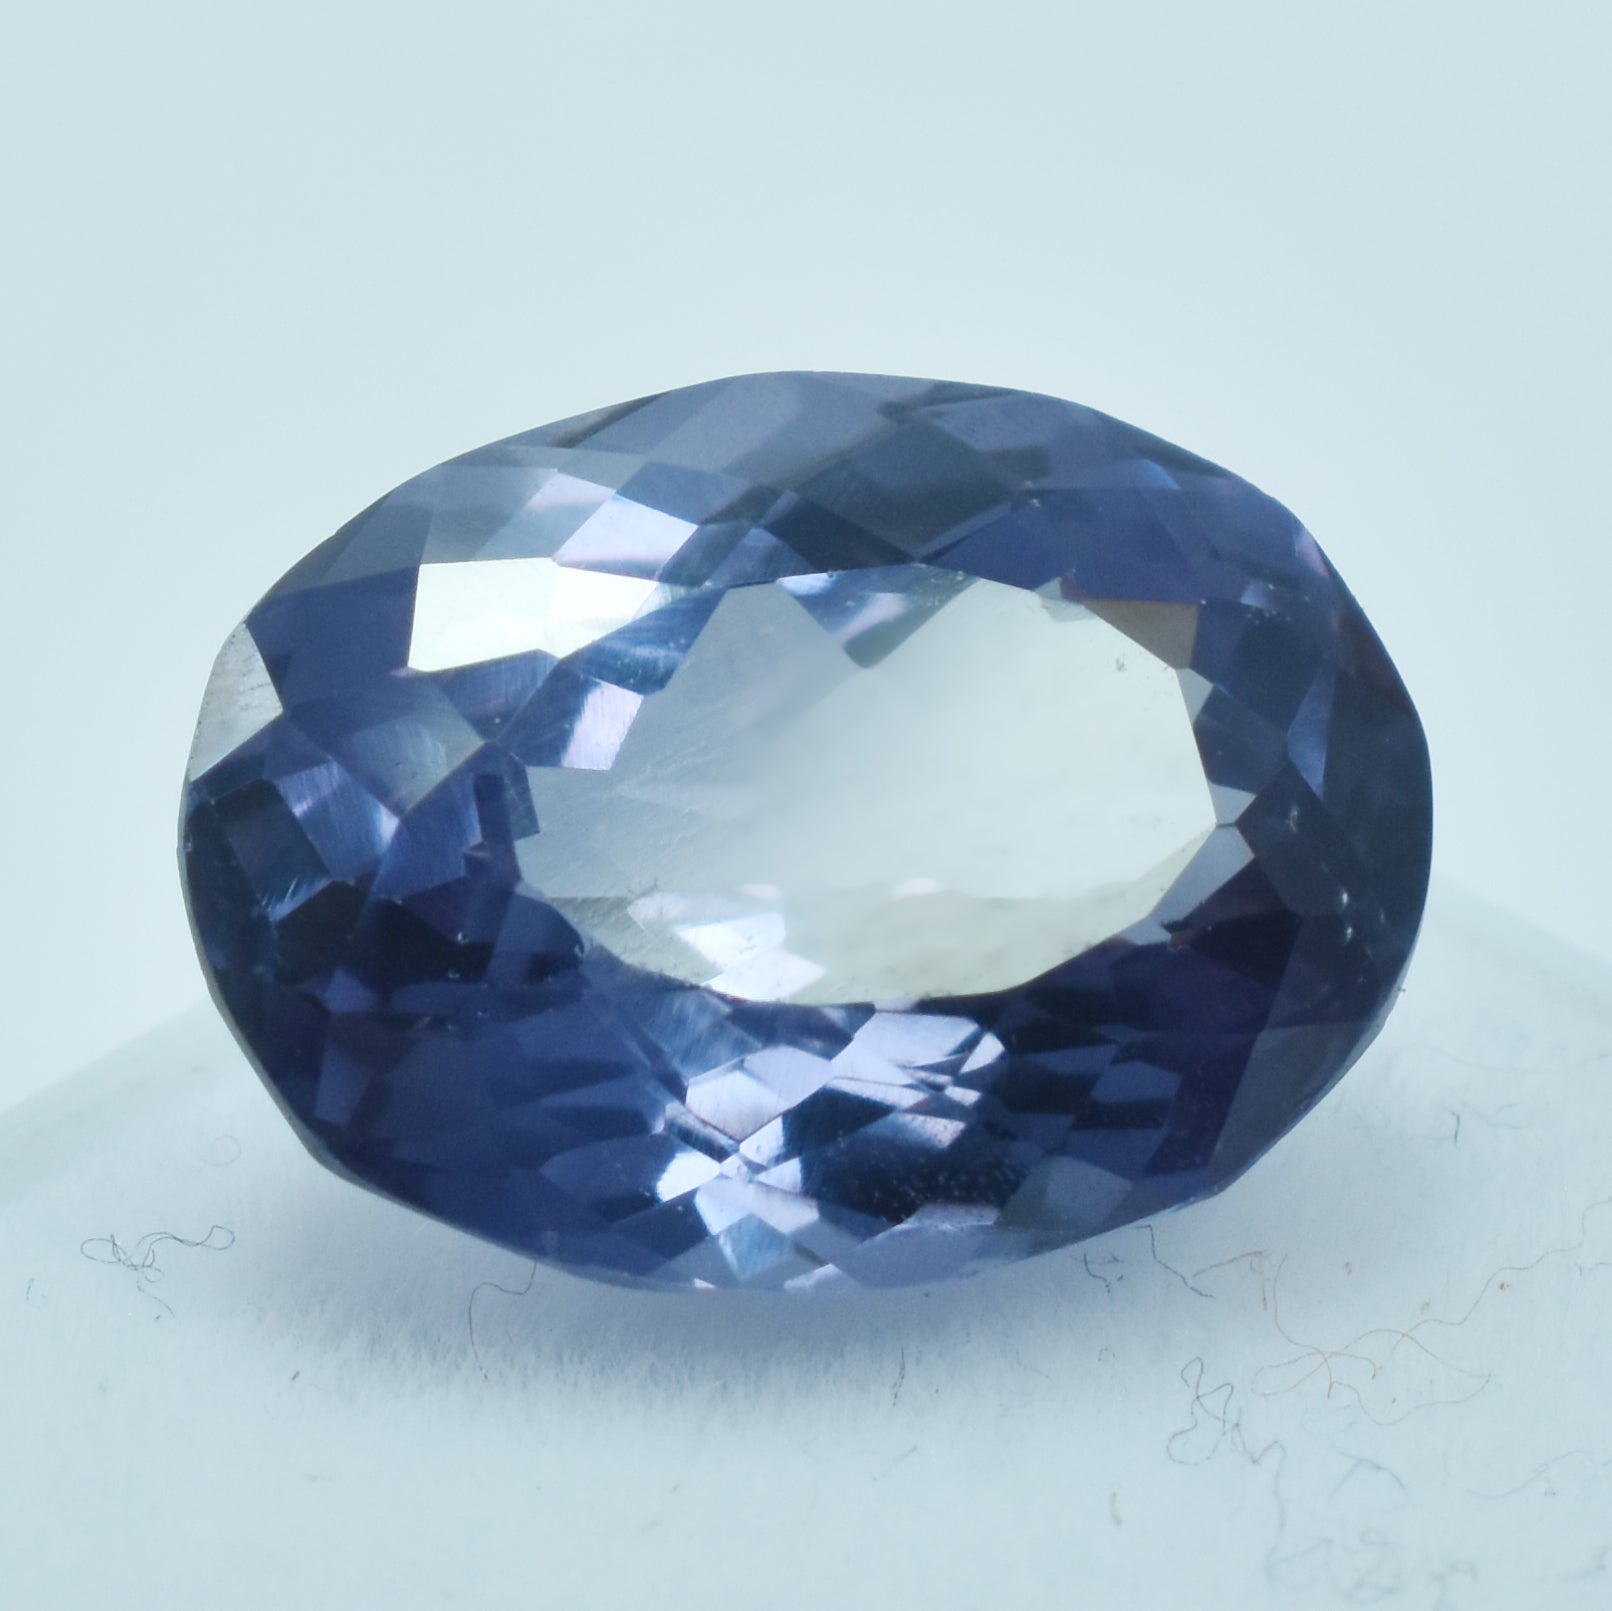 Beautiful Oval Cut Color-Change 7.45 Carat Alexandrite Natural Certified Loose Gemstone Alex Has Aesthetic Appeal